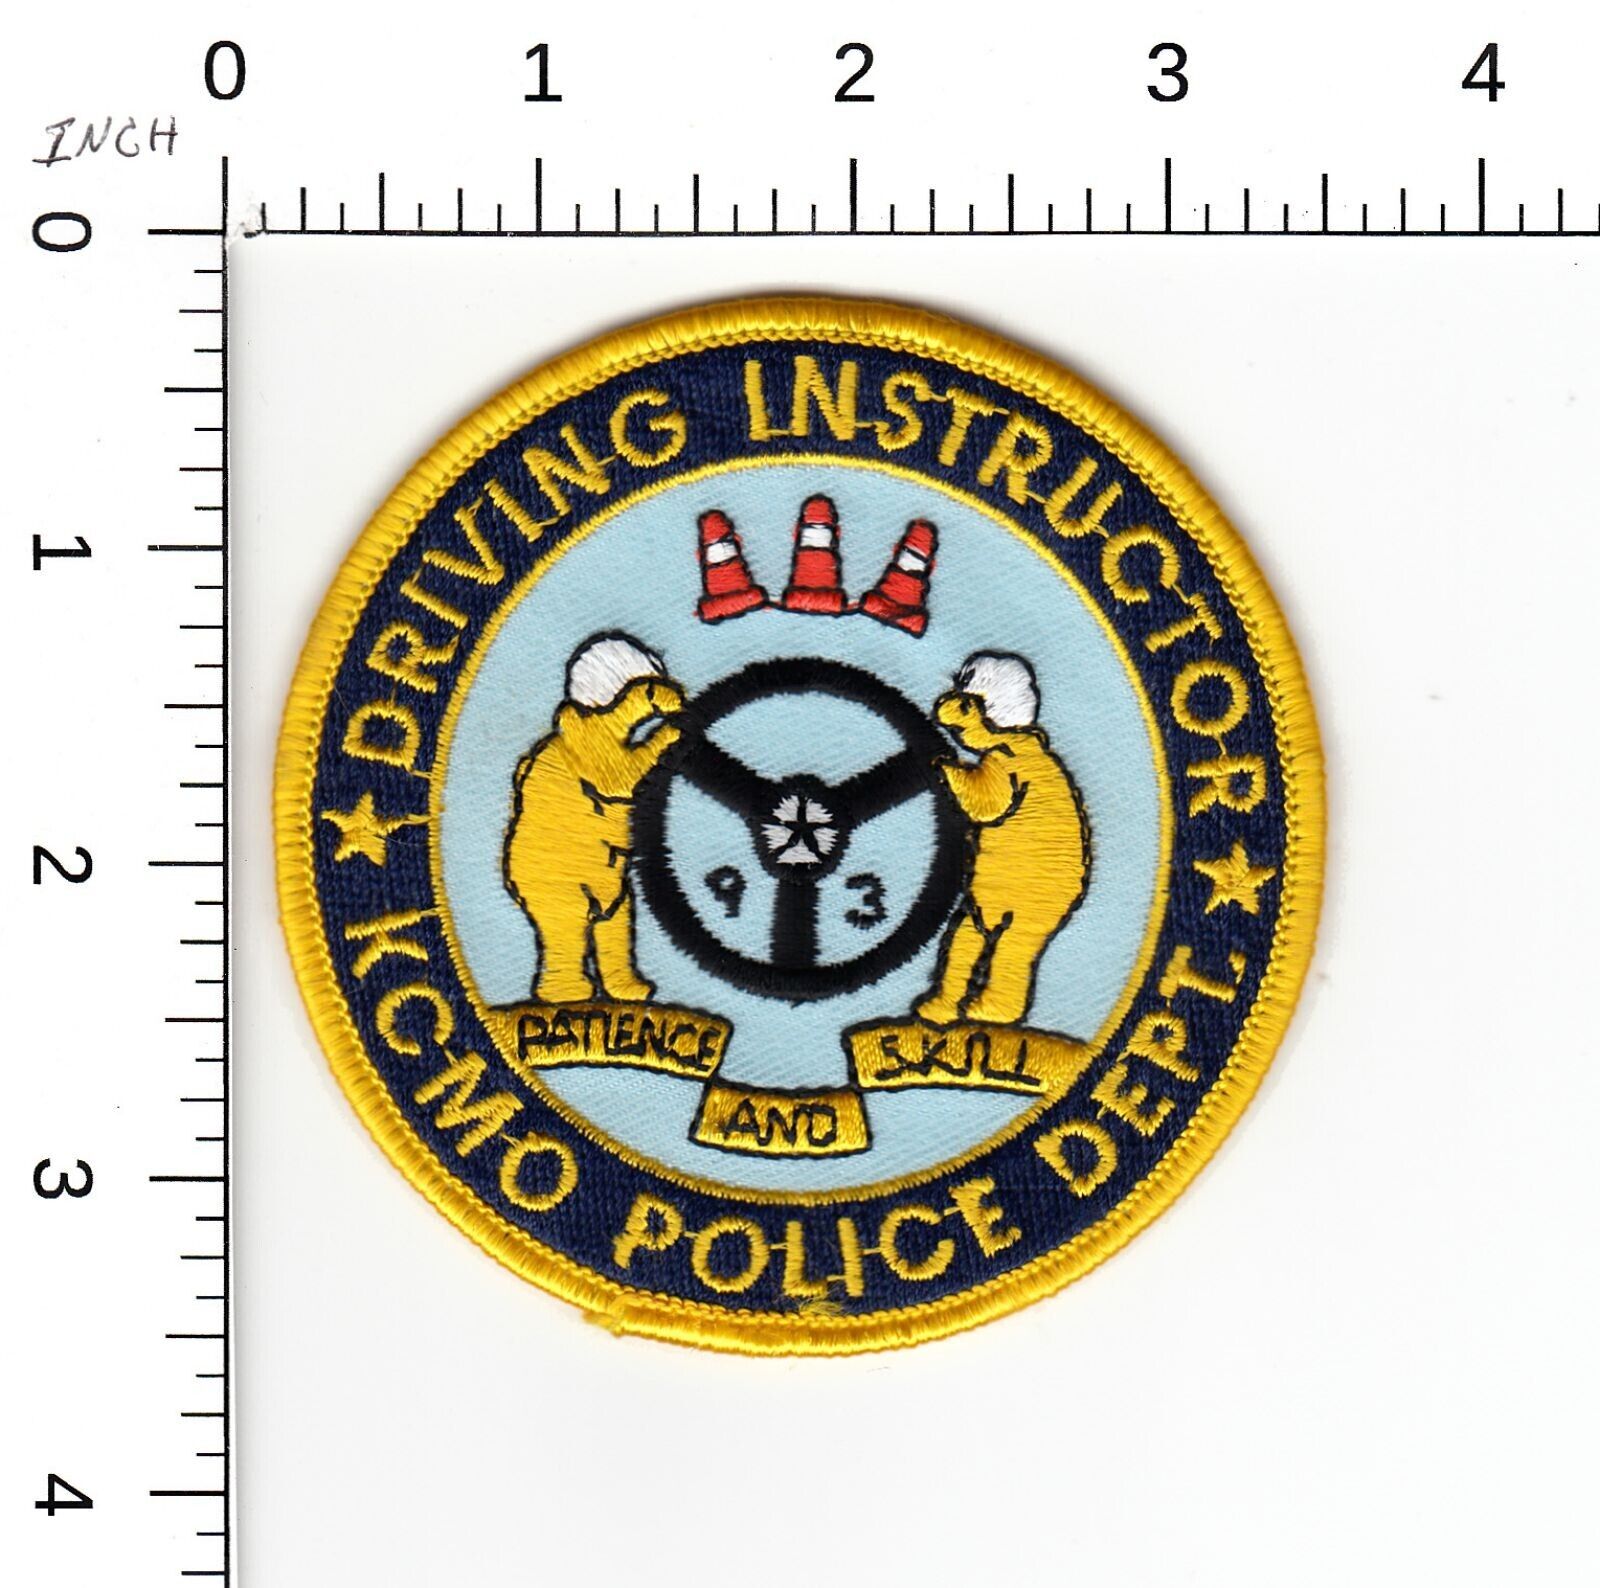 DRIVING INSTRUCTOR -- KANSAS CITY MISSOURI POLICE DEPARTMENT PATCH KCMO